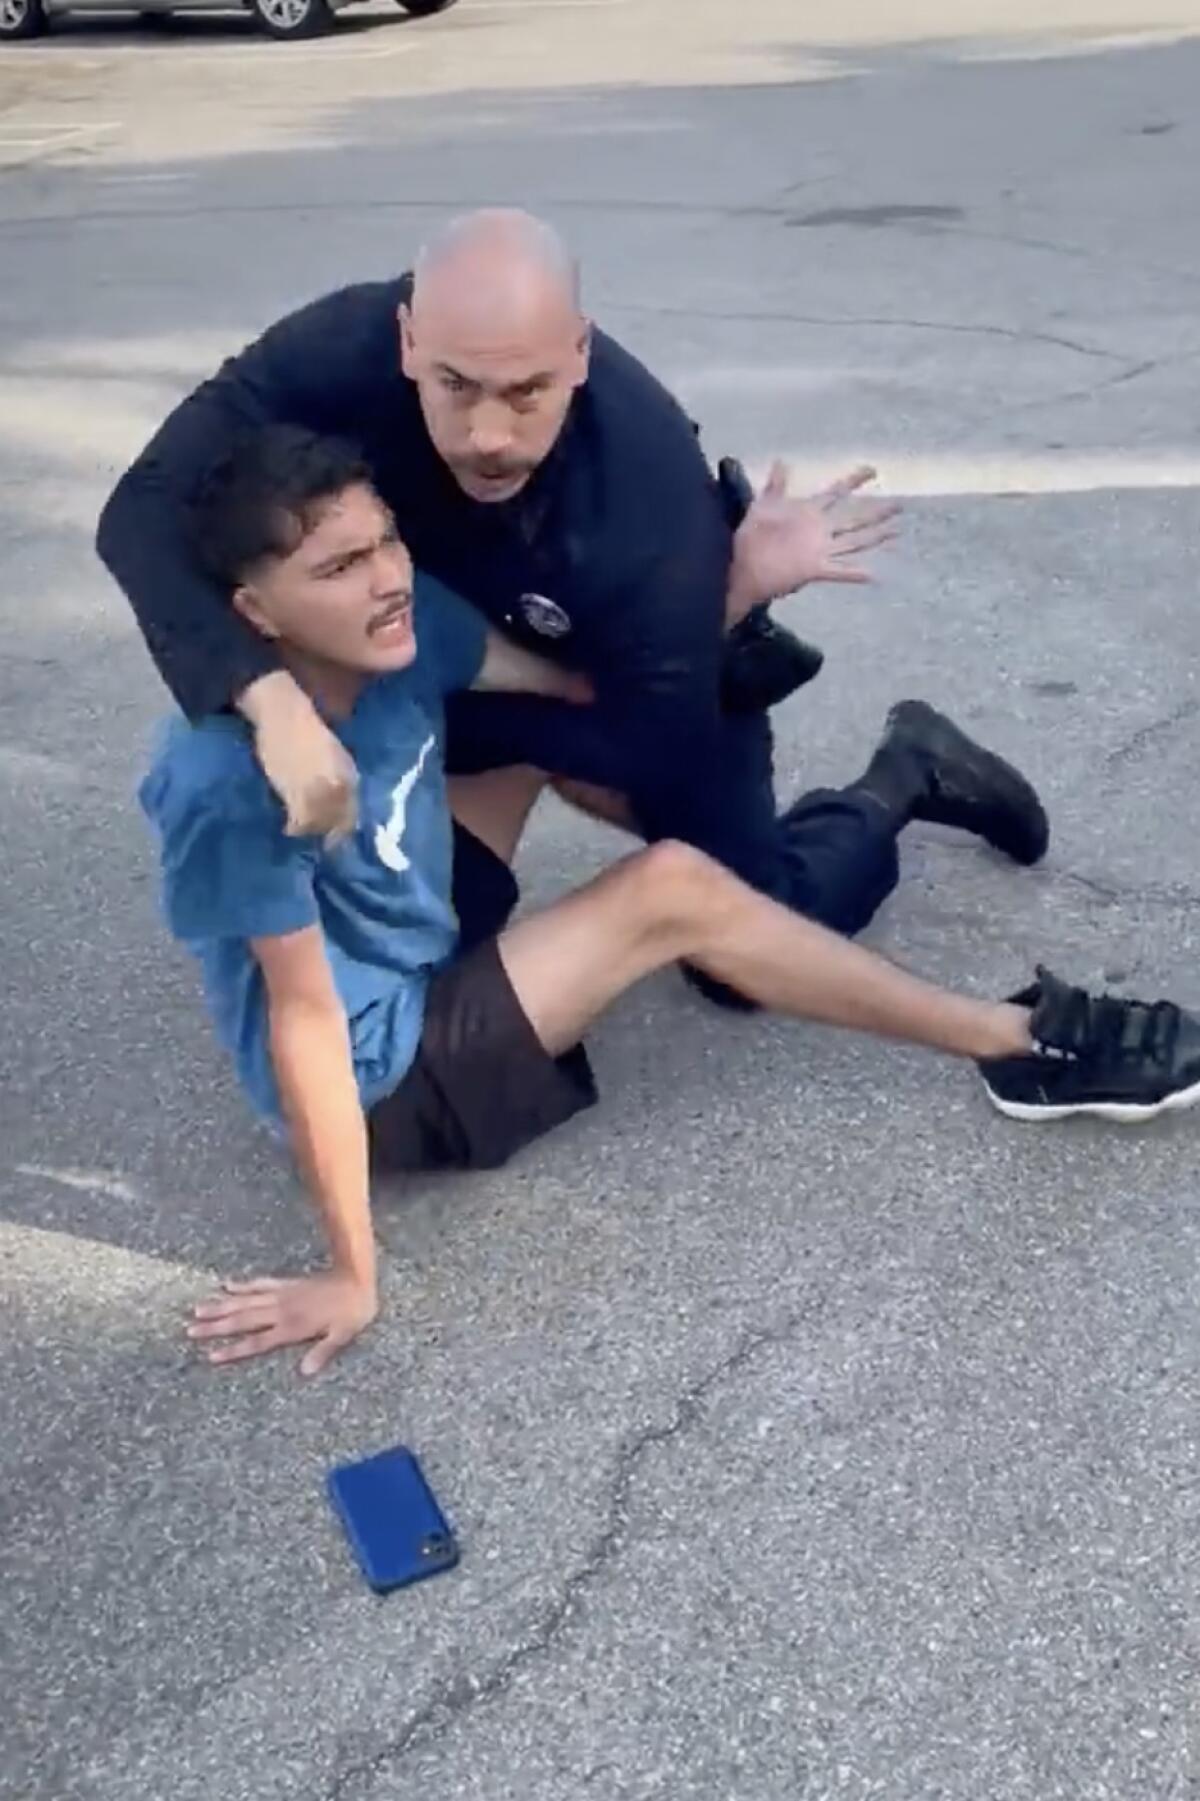 An unidentified Los Angeles police officer forcibly arrests Roberto Cortez 